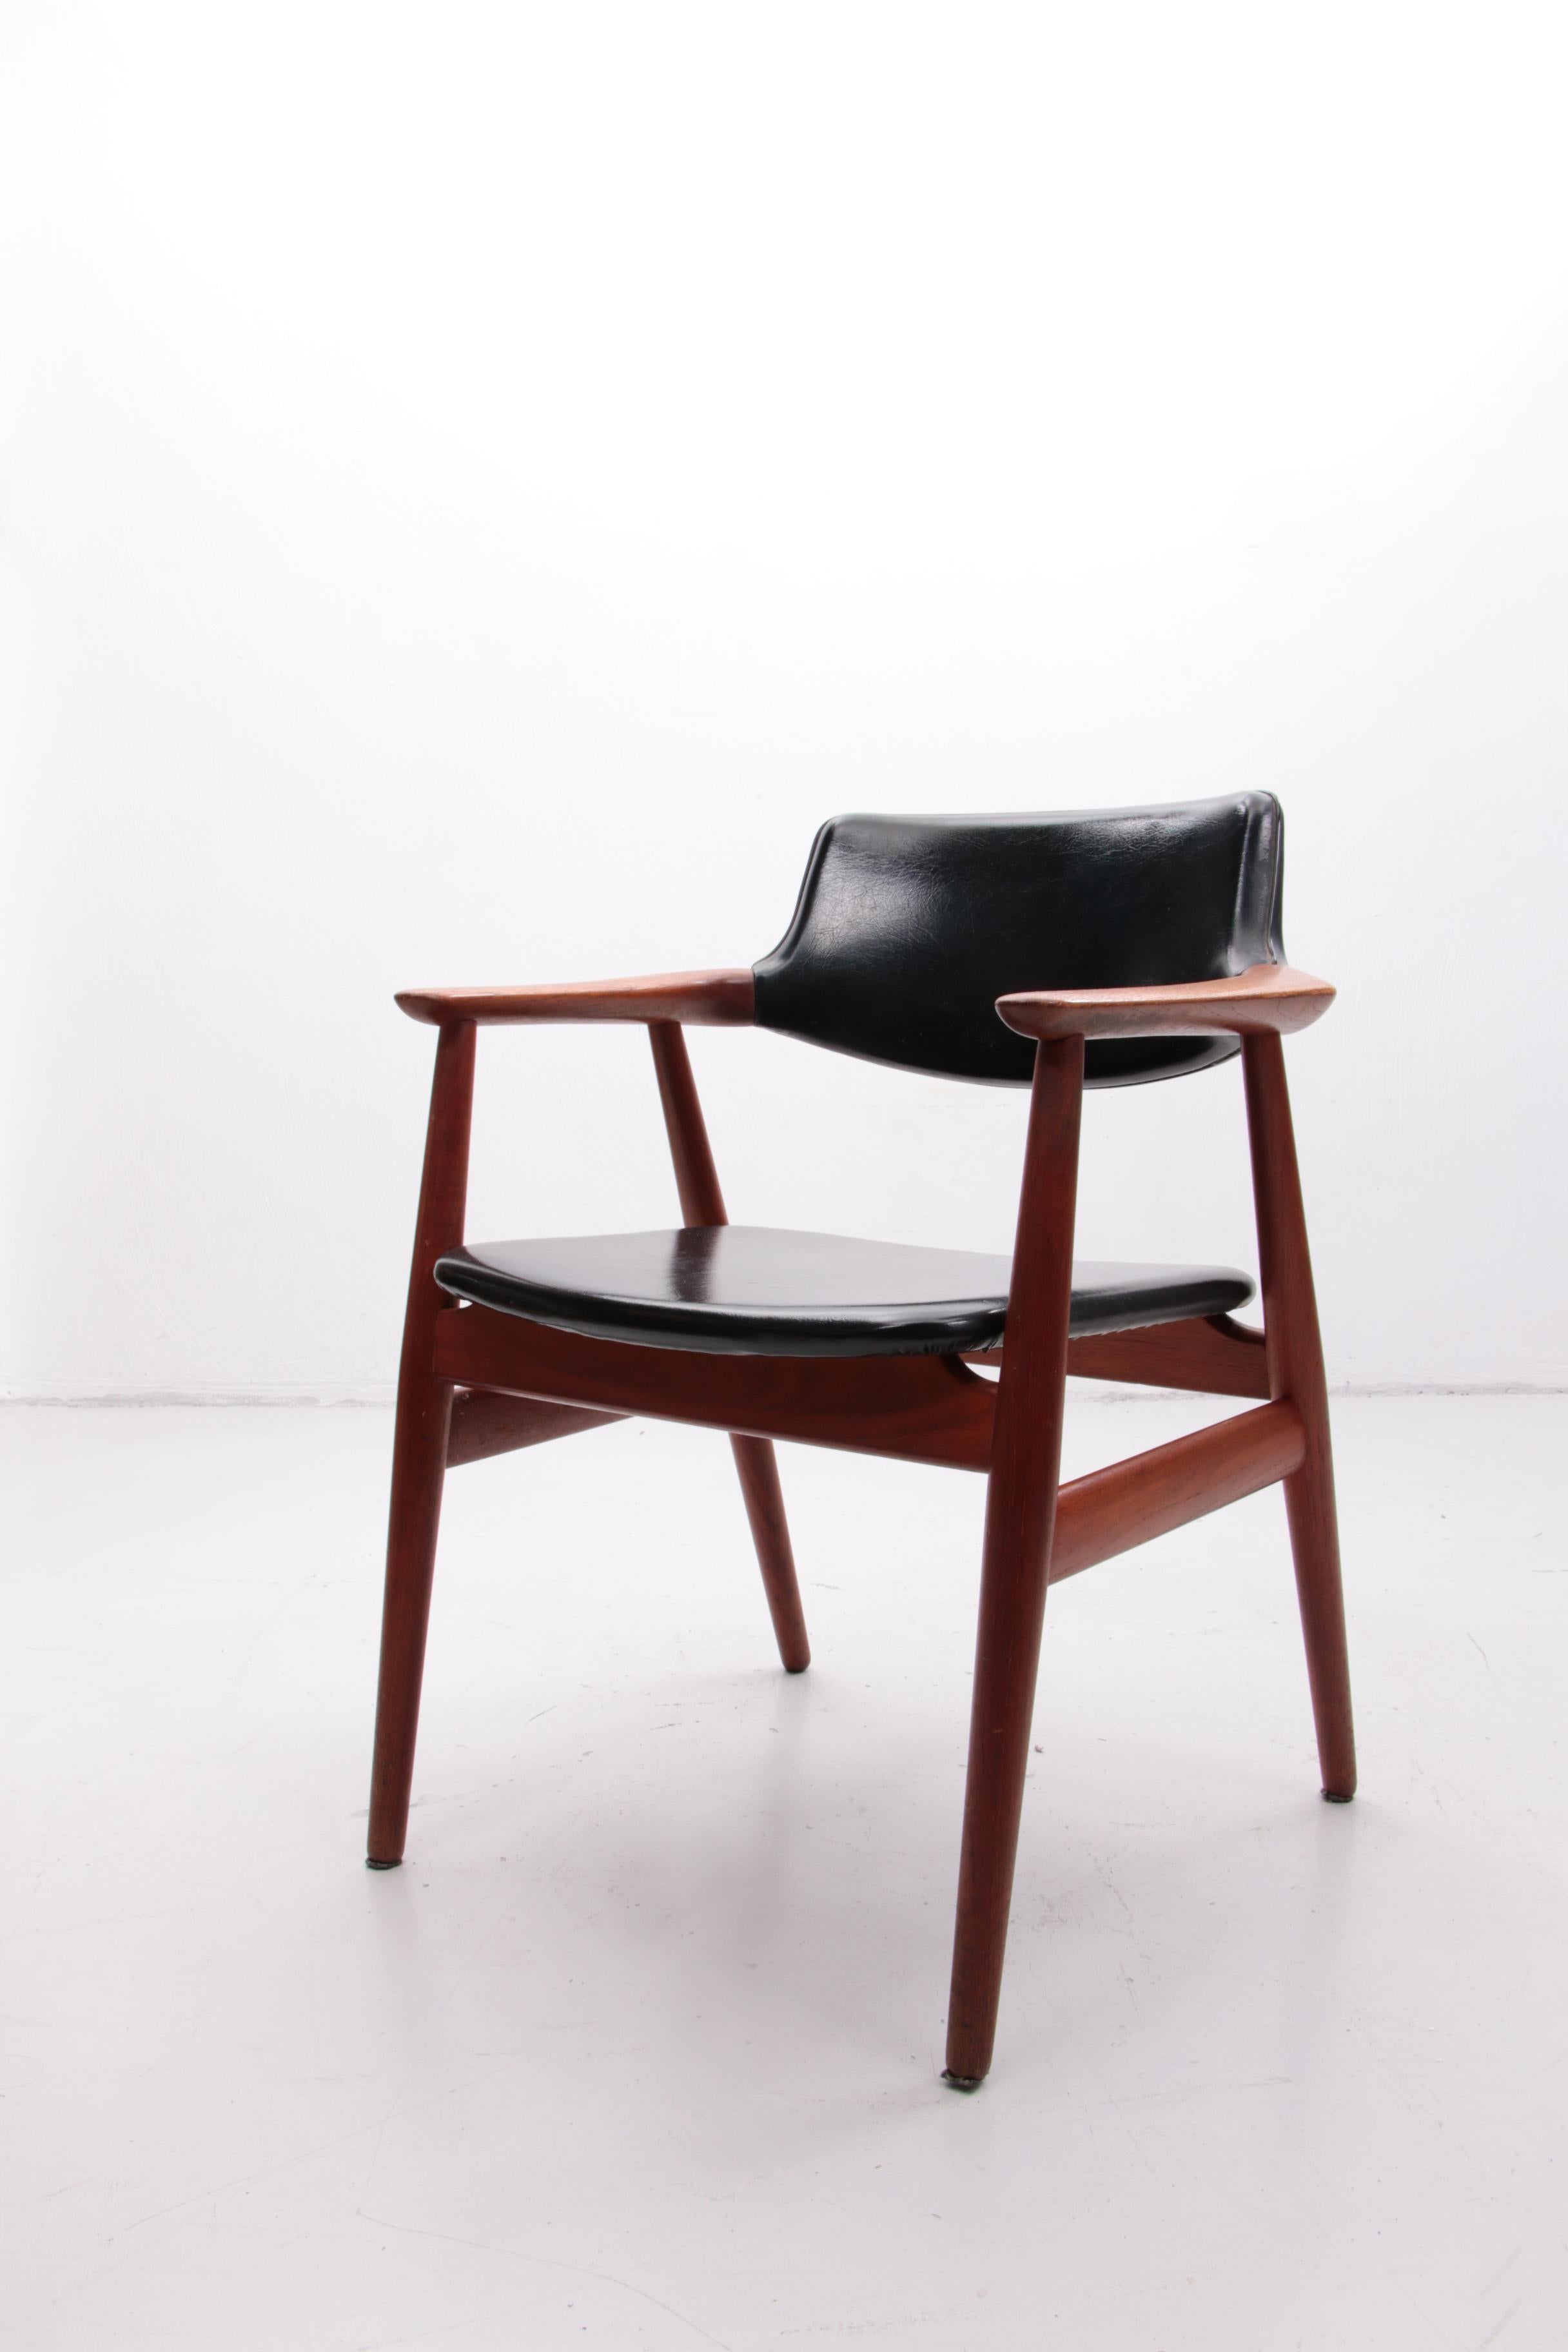 Mid-20th Century Svend Age Eriksen Dining Room Chair Model Gm11, 1960 For Sale